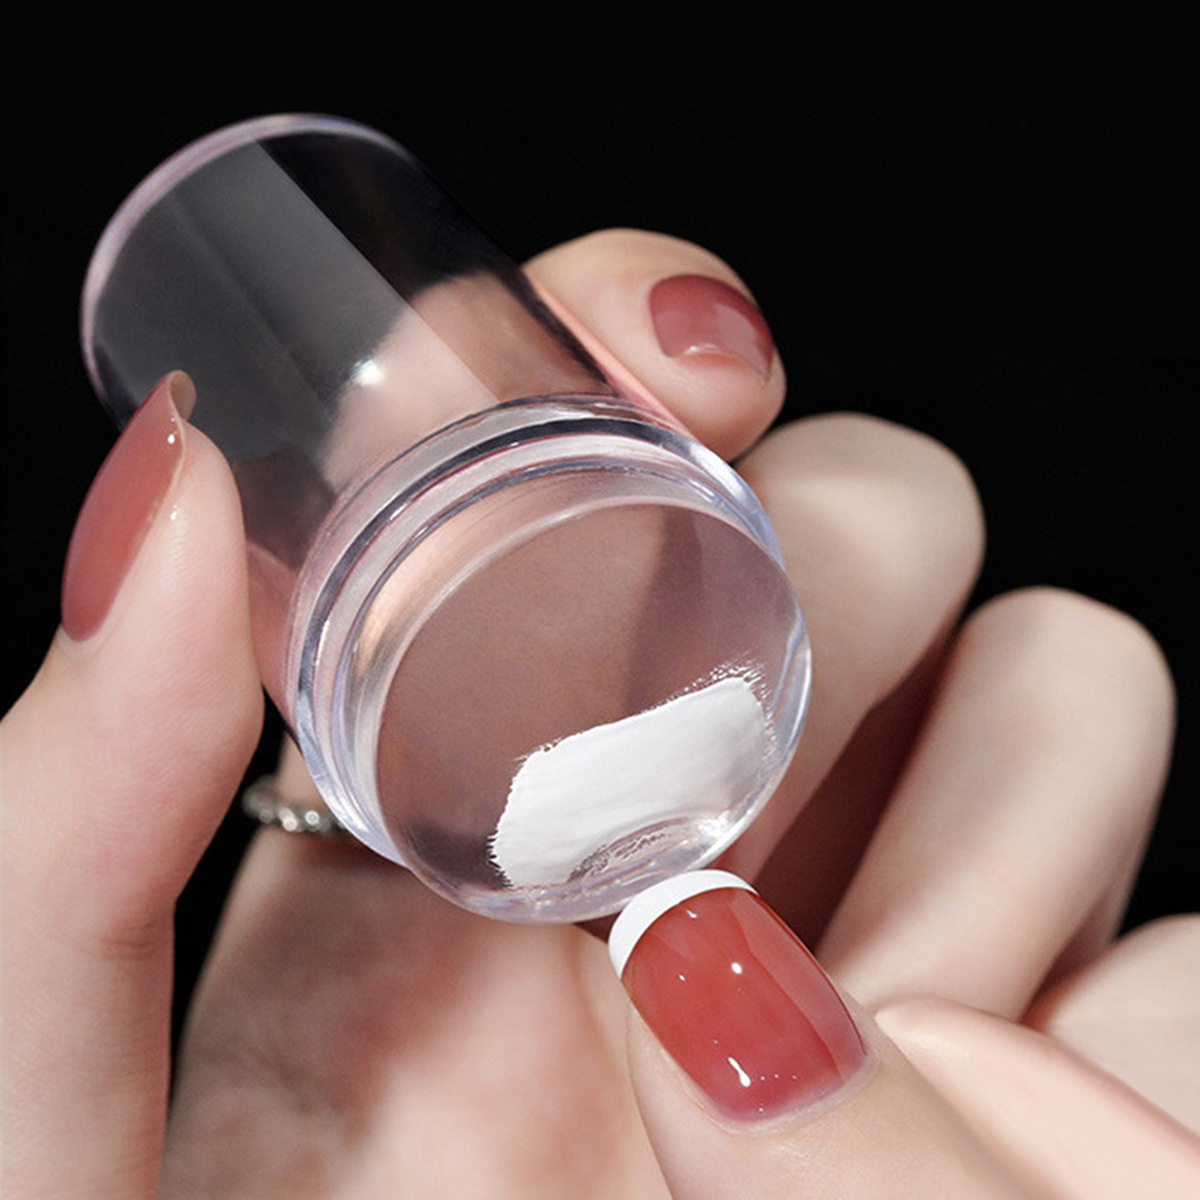 OPC-293 Nail Art Stamper, Clear Silicone Stamping Jelly with Scraper, Transparent Visible Body, No Misplacement for DIY Nail Decor